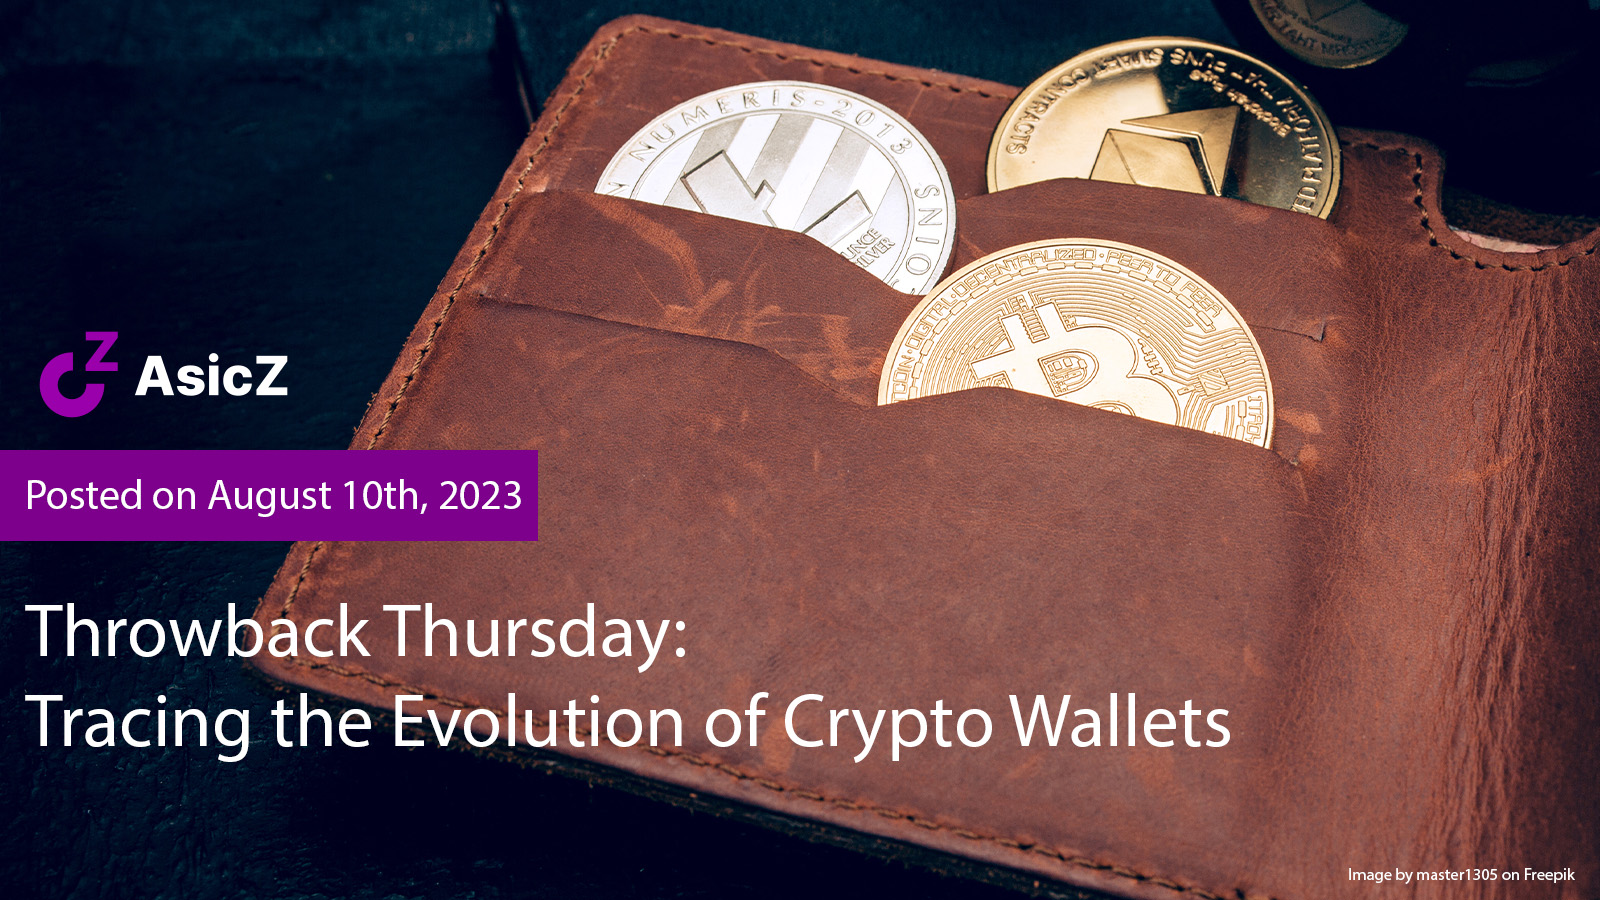 Throwback Thursday: Tracing the Evolution of Crypto Wallets